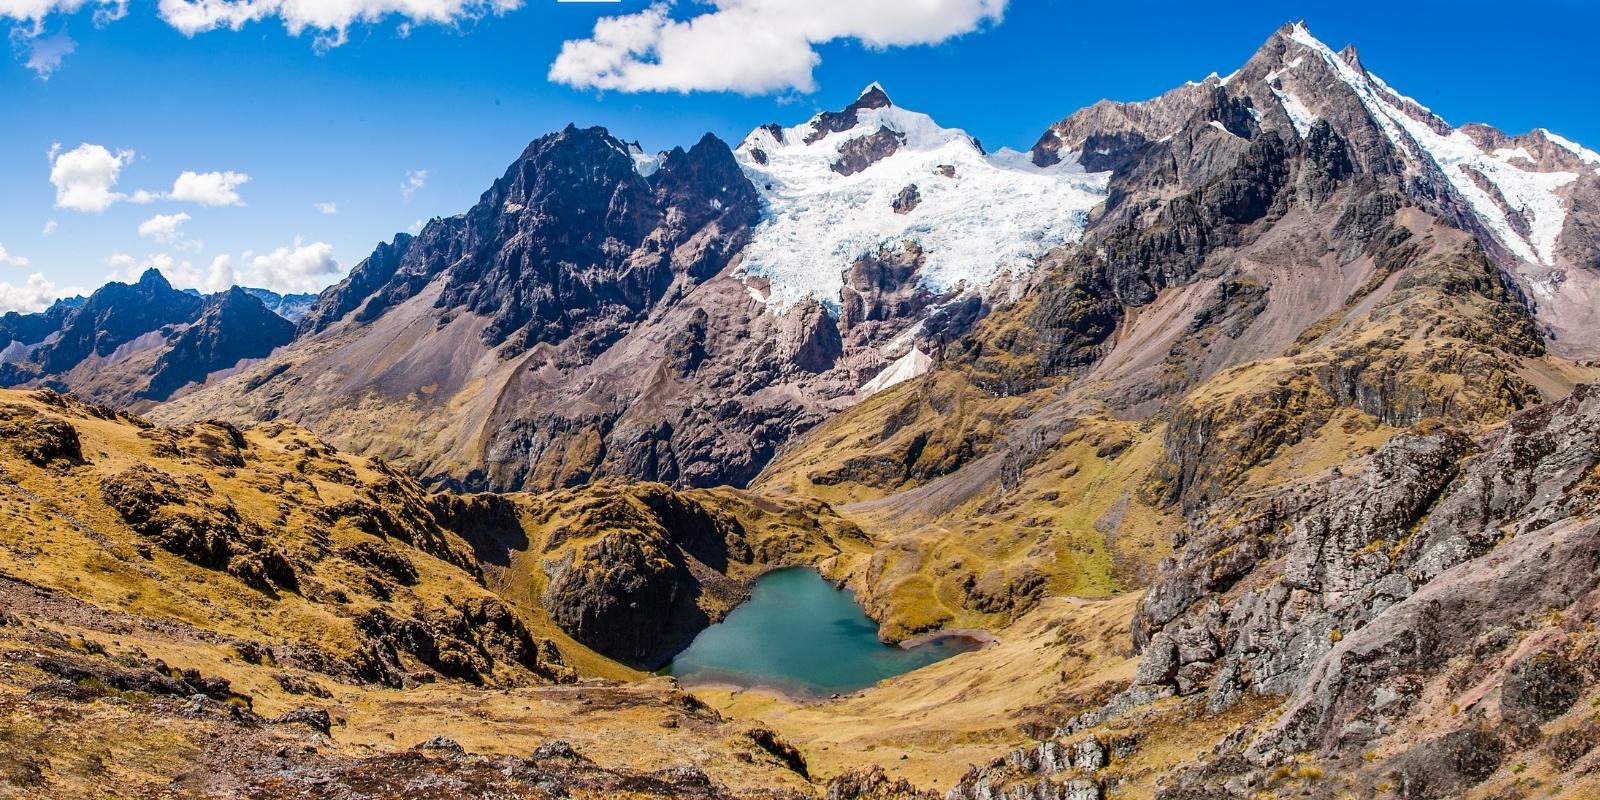 ARCHAEOLOGICAL ATTRACTIONS OF THE LARES TREK